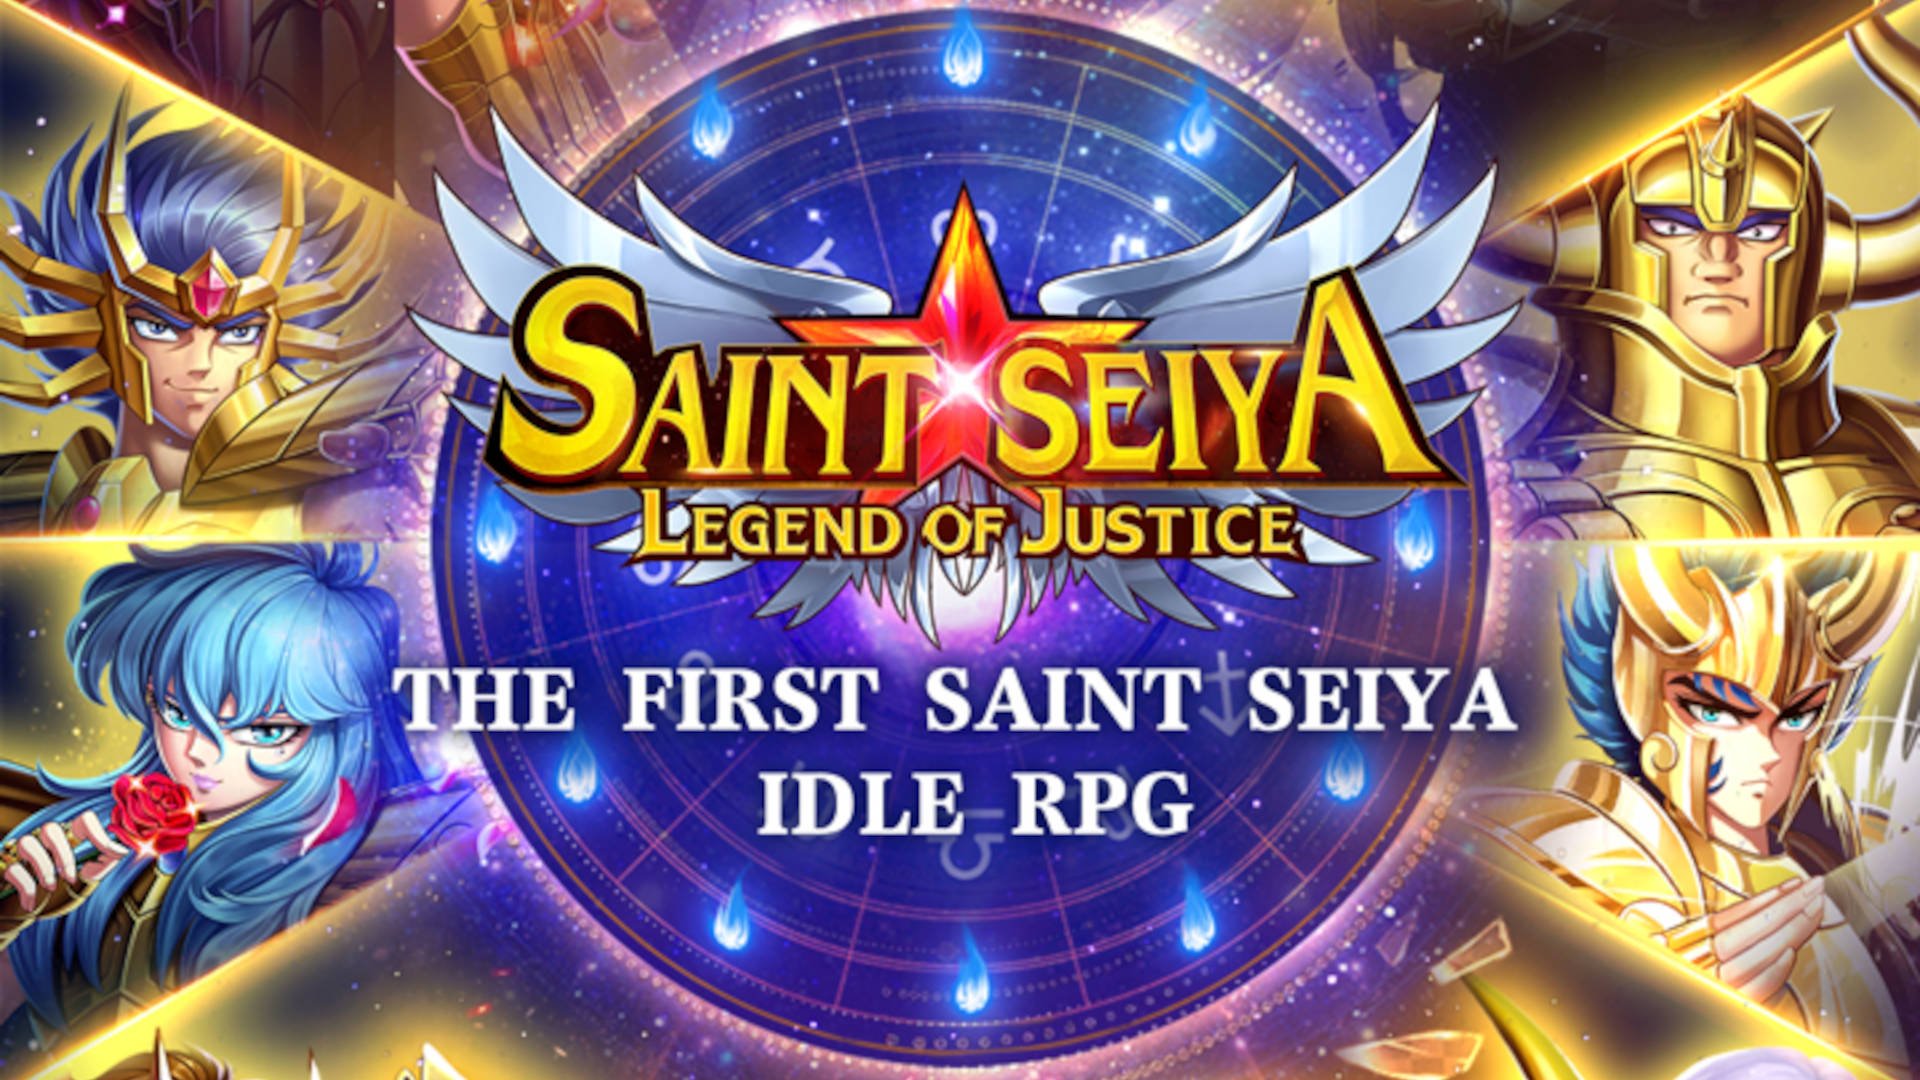 The official Saint Seiya: Legend of Justice logo